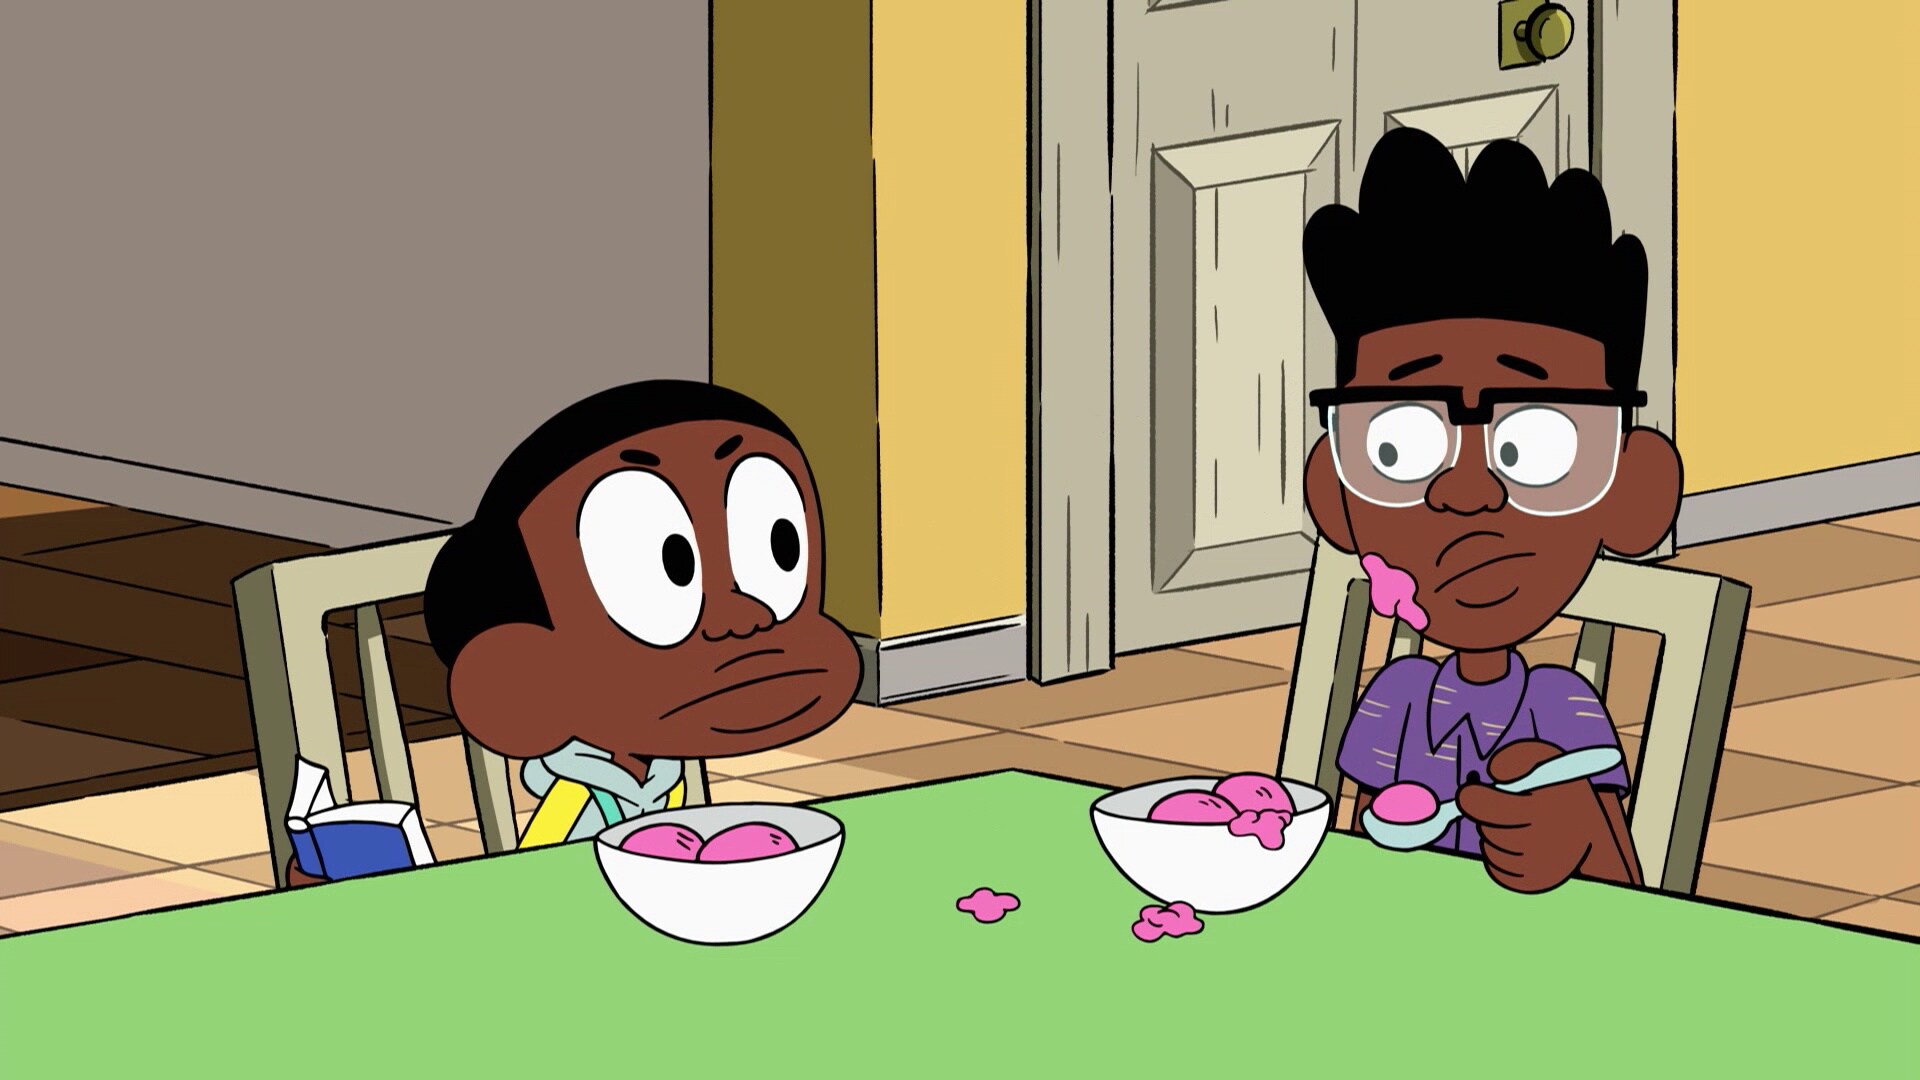 Craig of the Creek | Games, Videos and Downloads | Cartoon Network